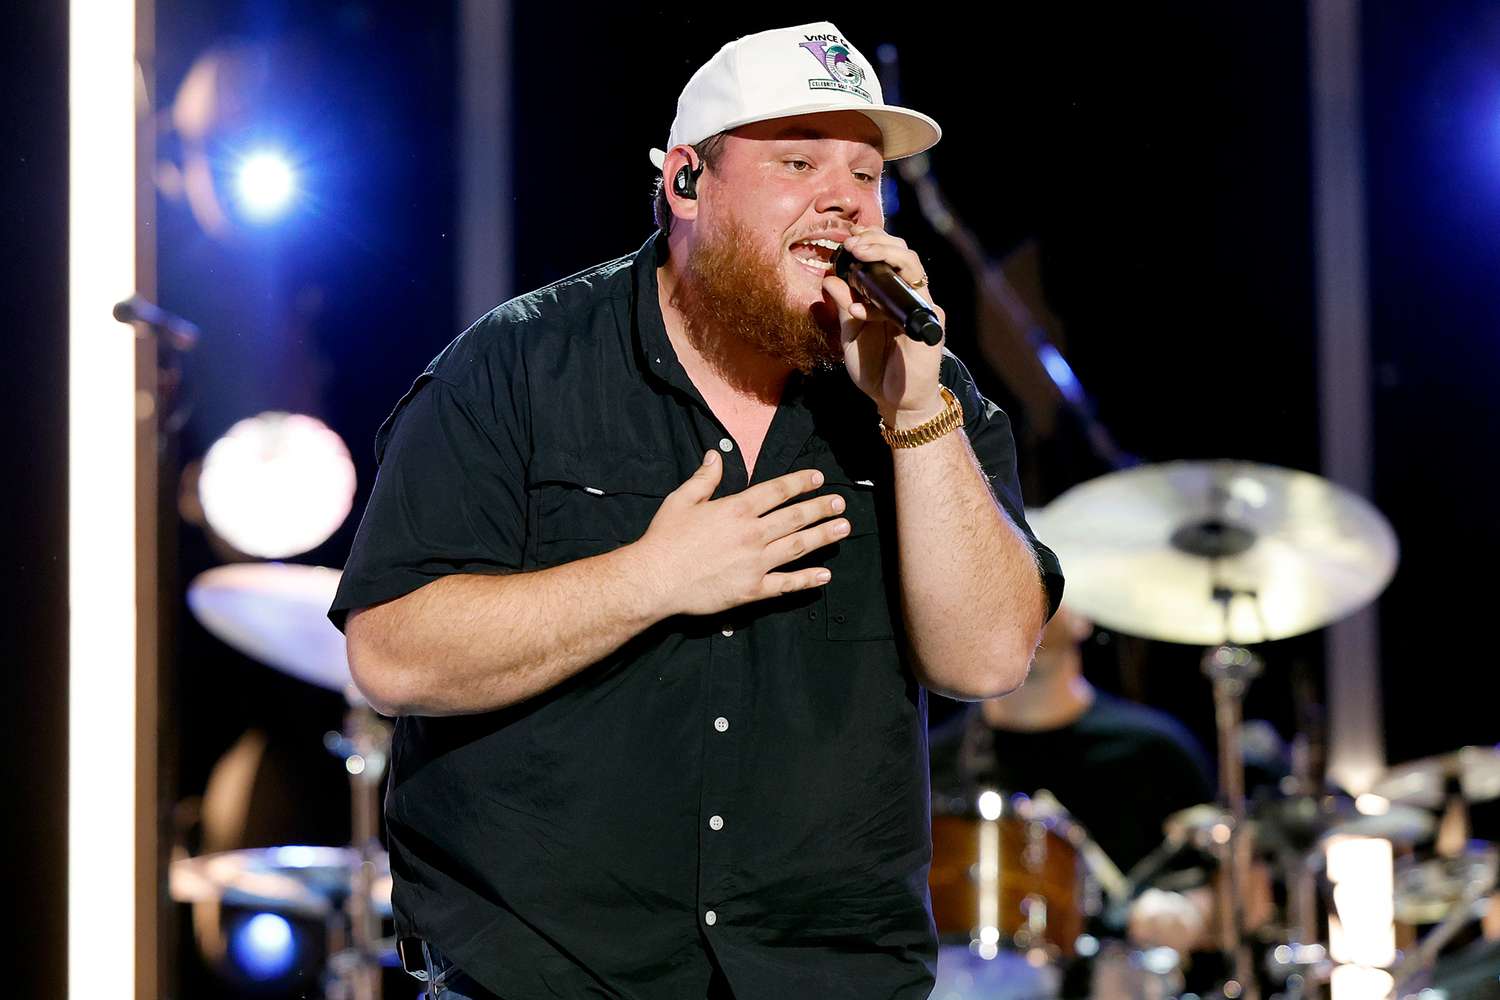 How Many Albums Does Luke Combs Have